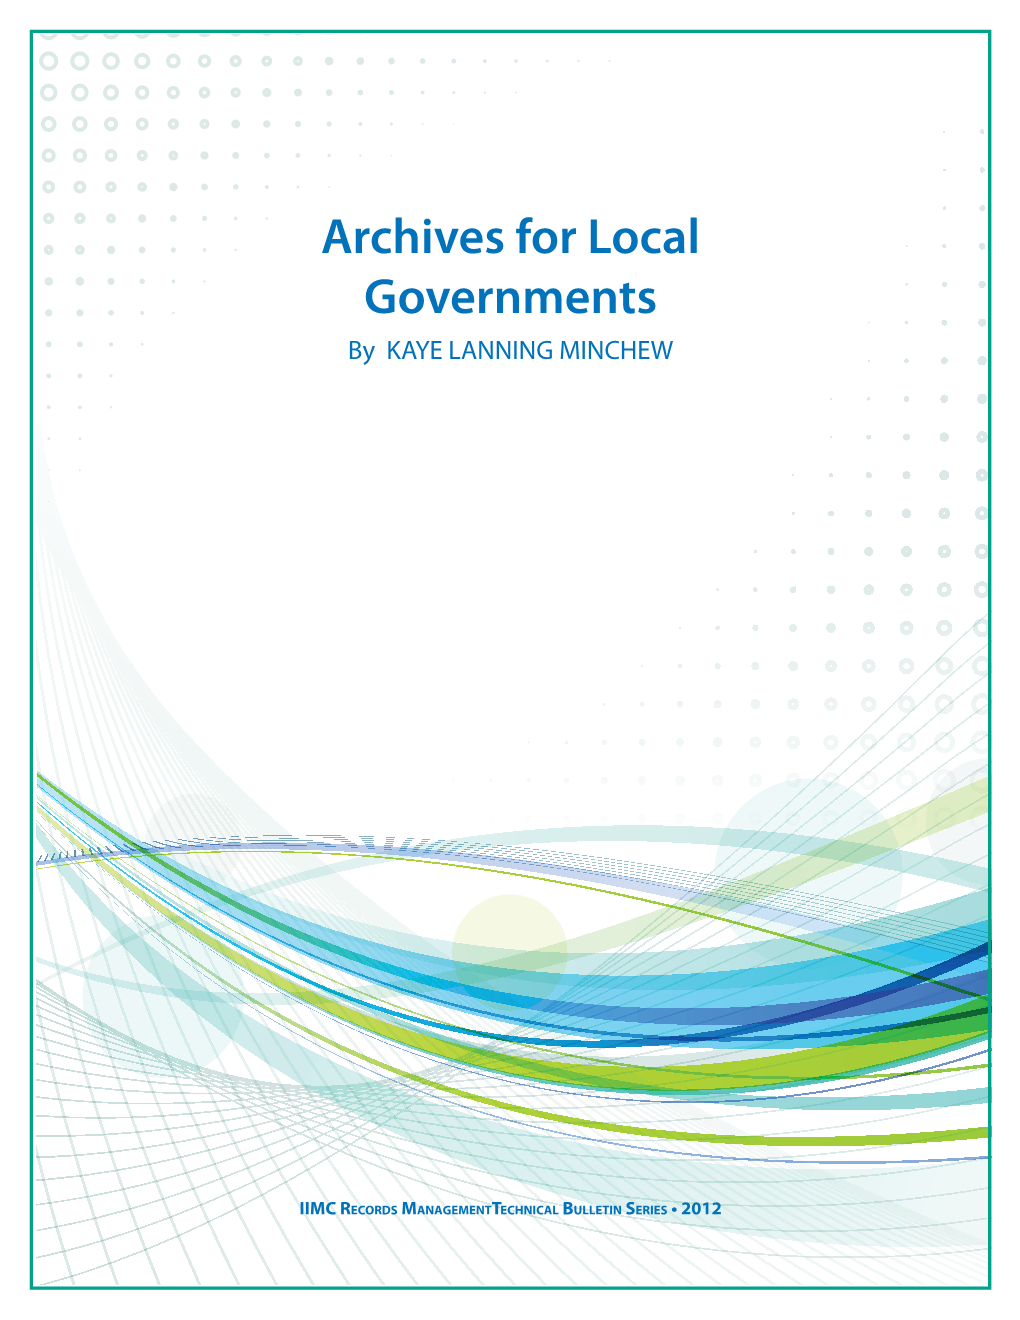 Archives for Local Governments by KAYE LANNING MINCHEW